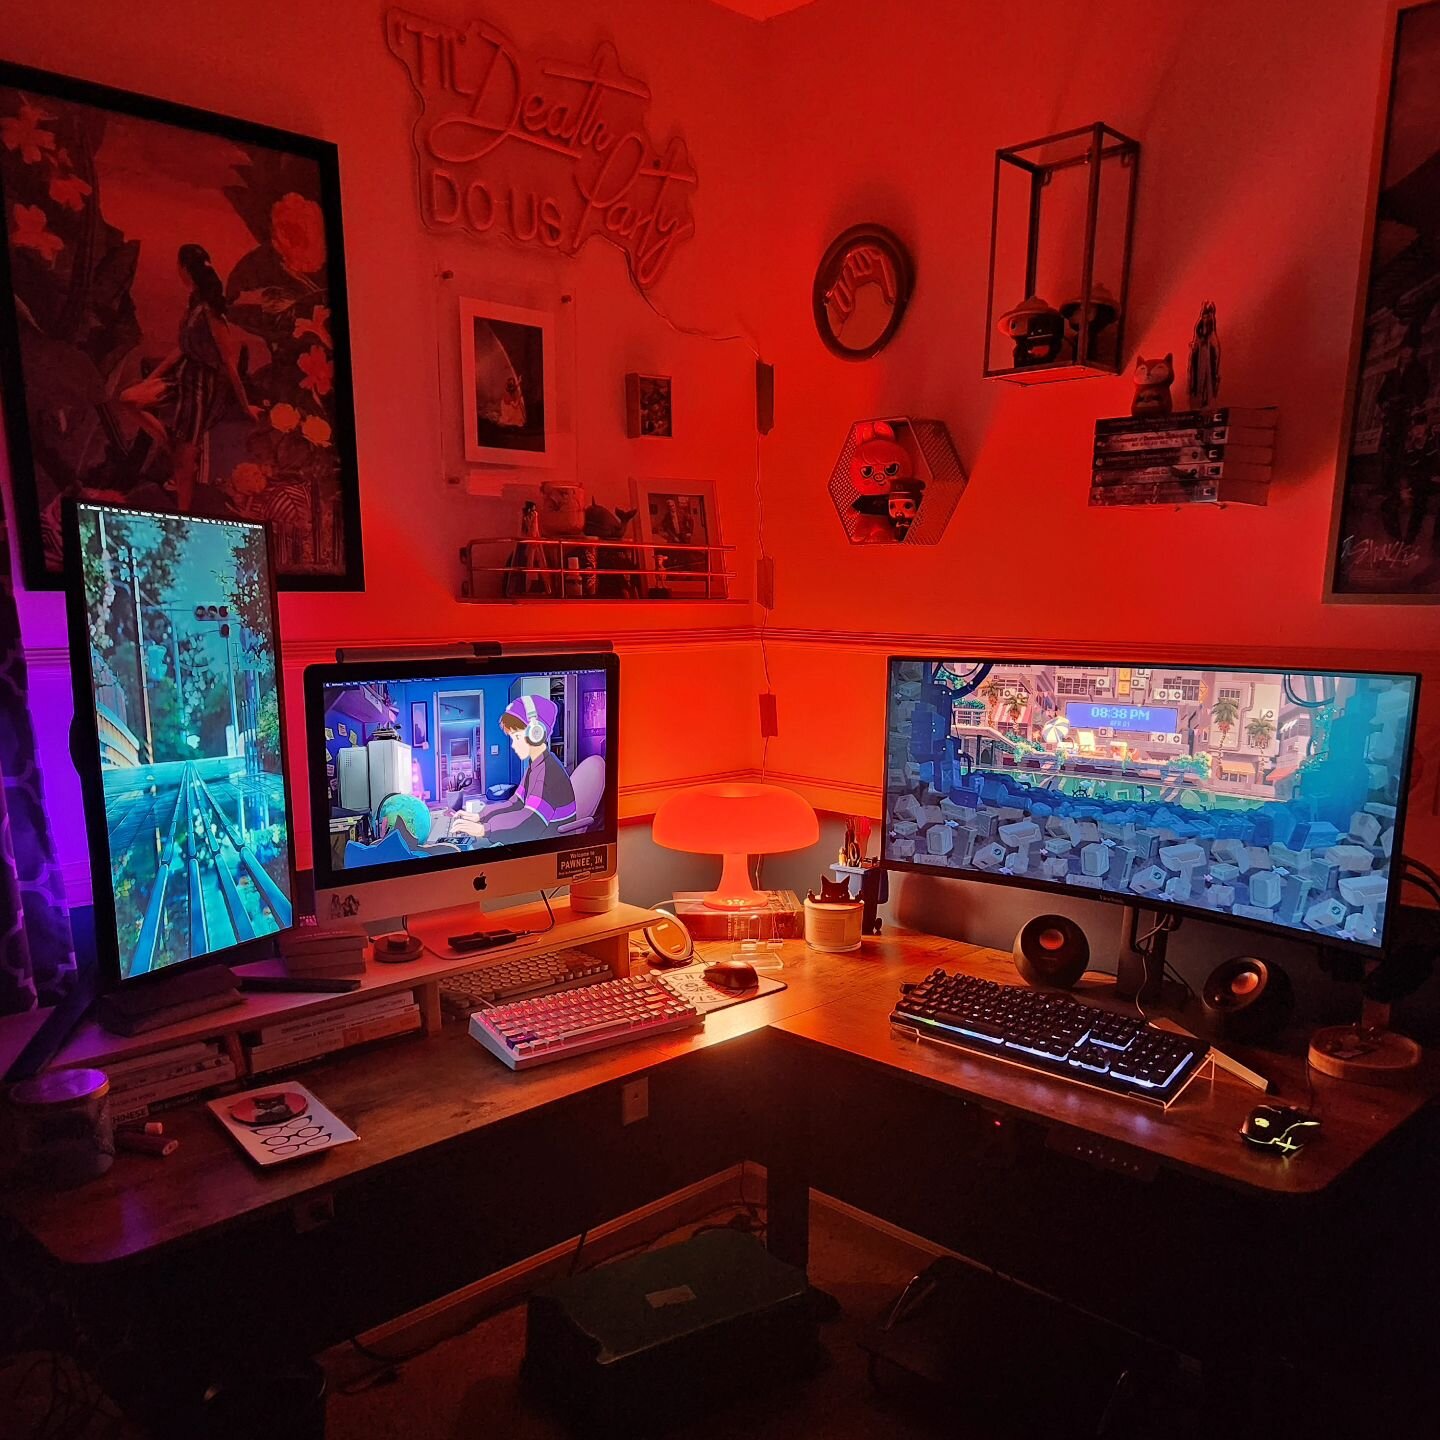 Business on the left, party on the right.
One last upgrade to kick off wild writing, video editing, and gaming for the rest of 2024. 🔥🖤
(Don't worry. I turn on other lights too when I'm actively working. 😂🤌) #amwriting #gamingsetup #bledits